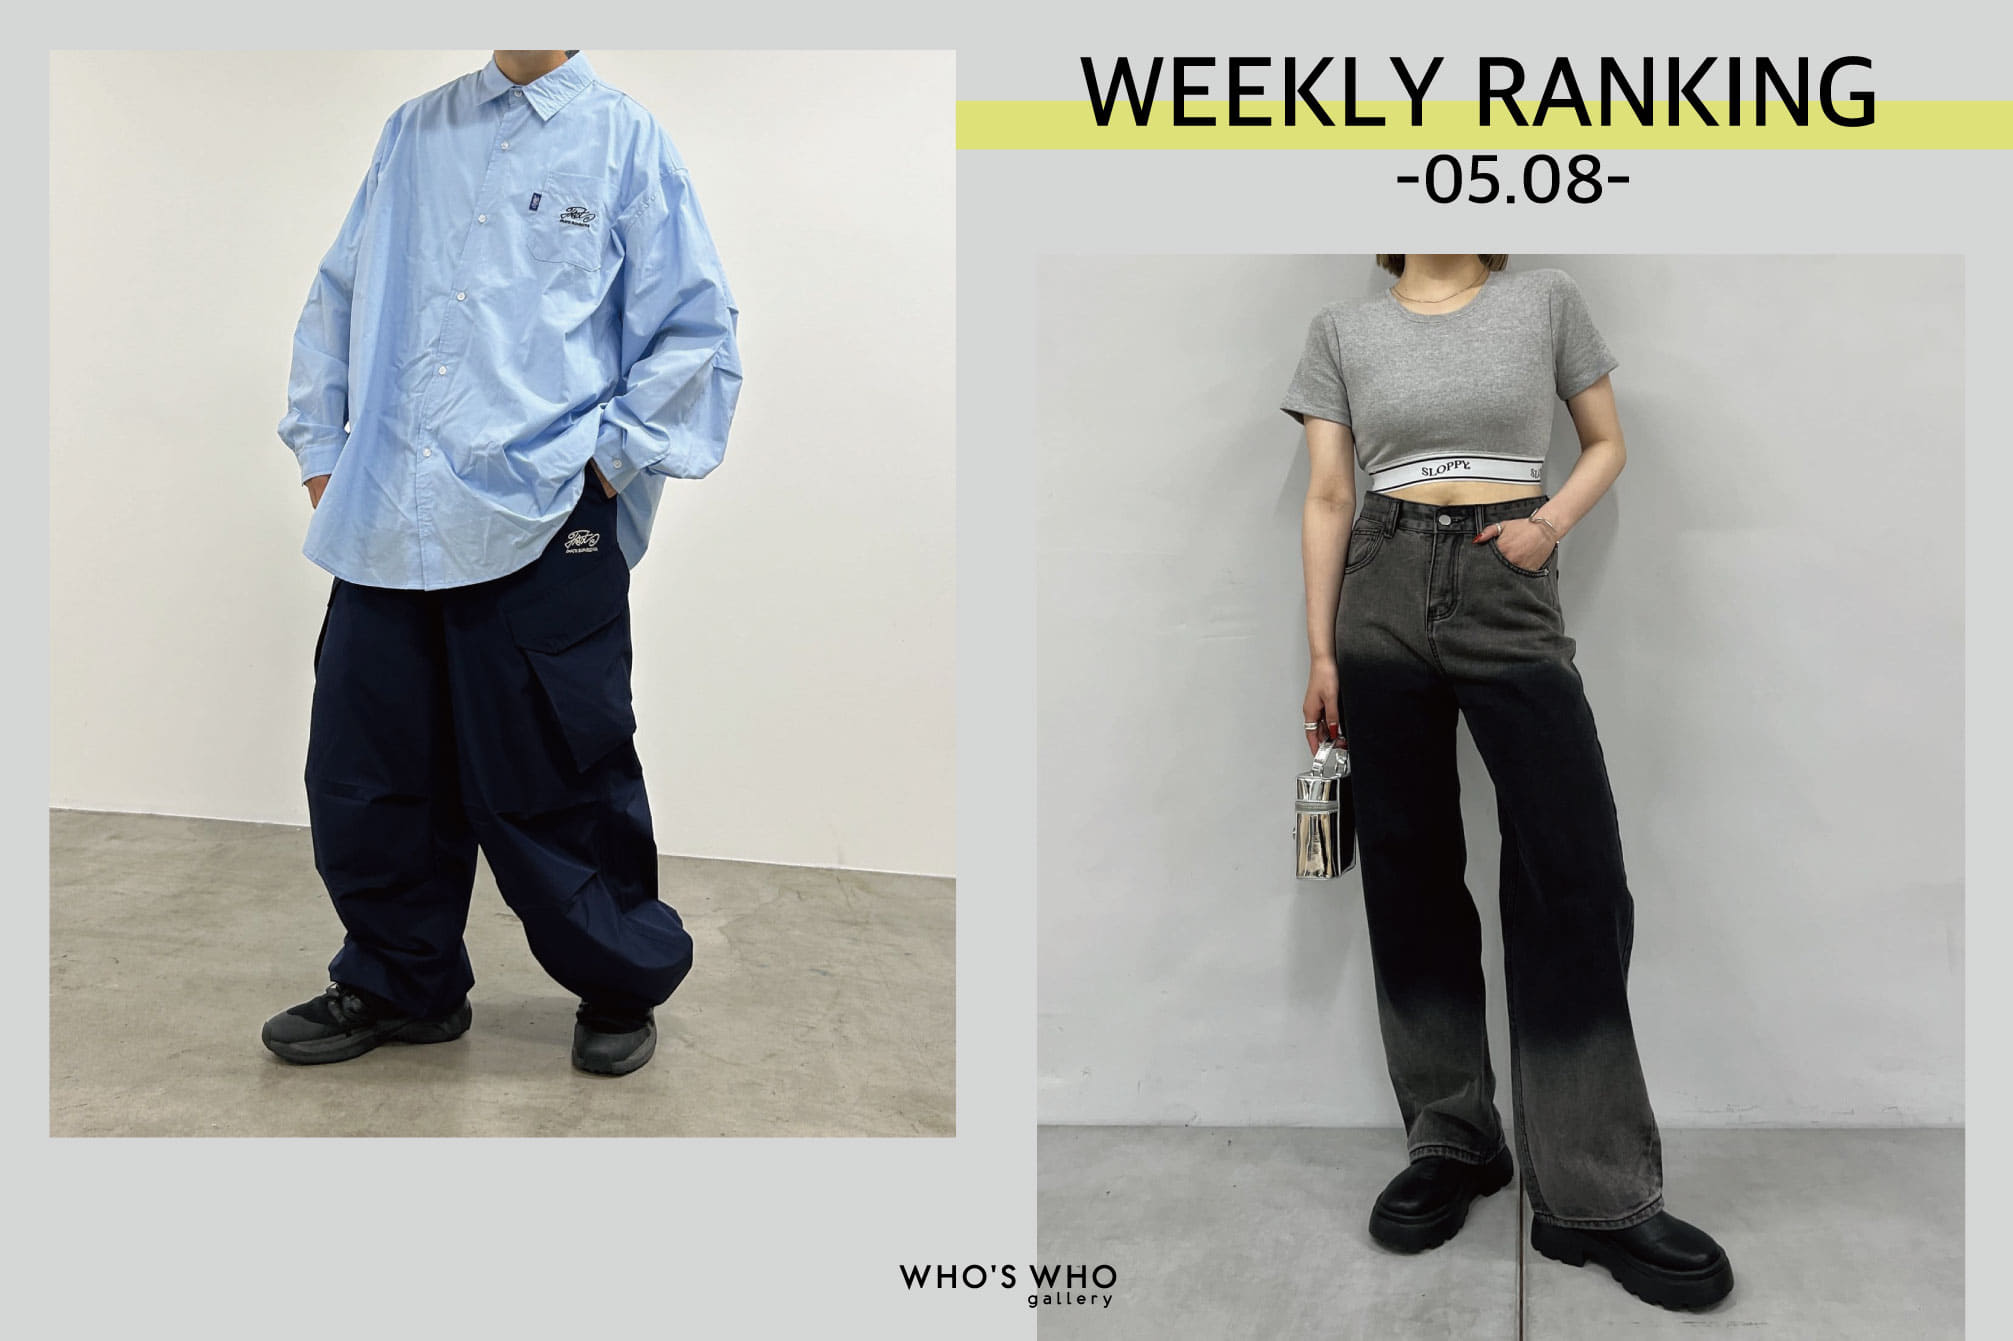 WHO’S WHO gallery 【WEEKLY RANKING -05.08-】